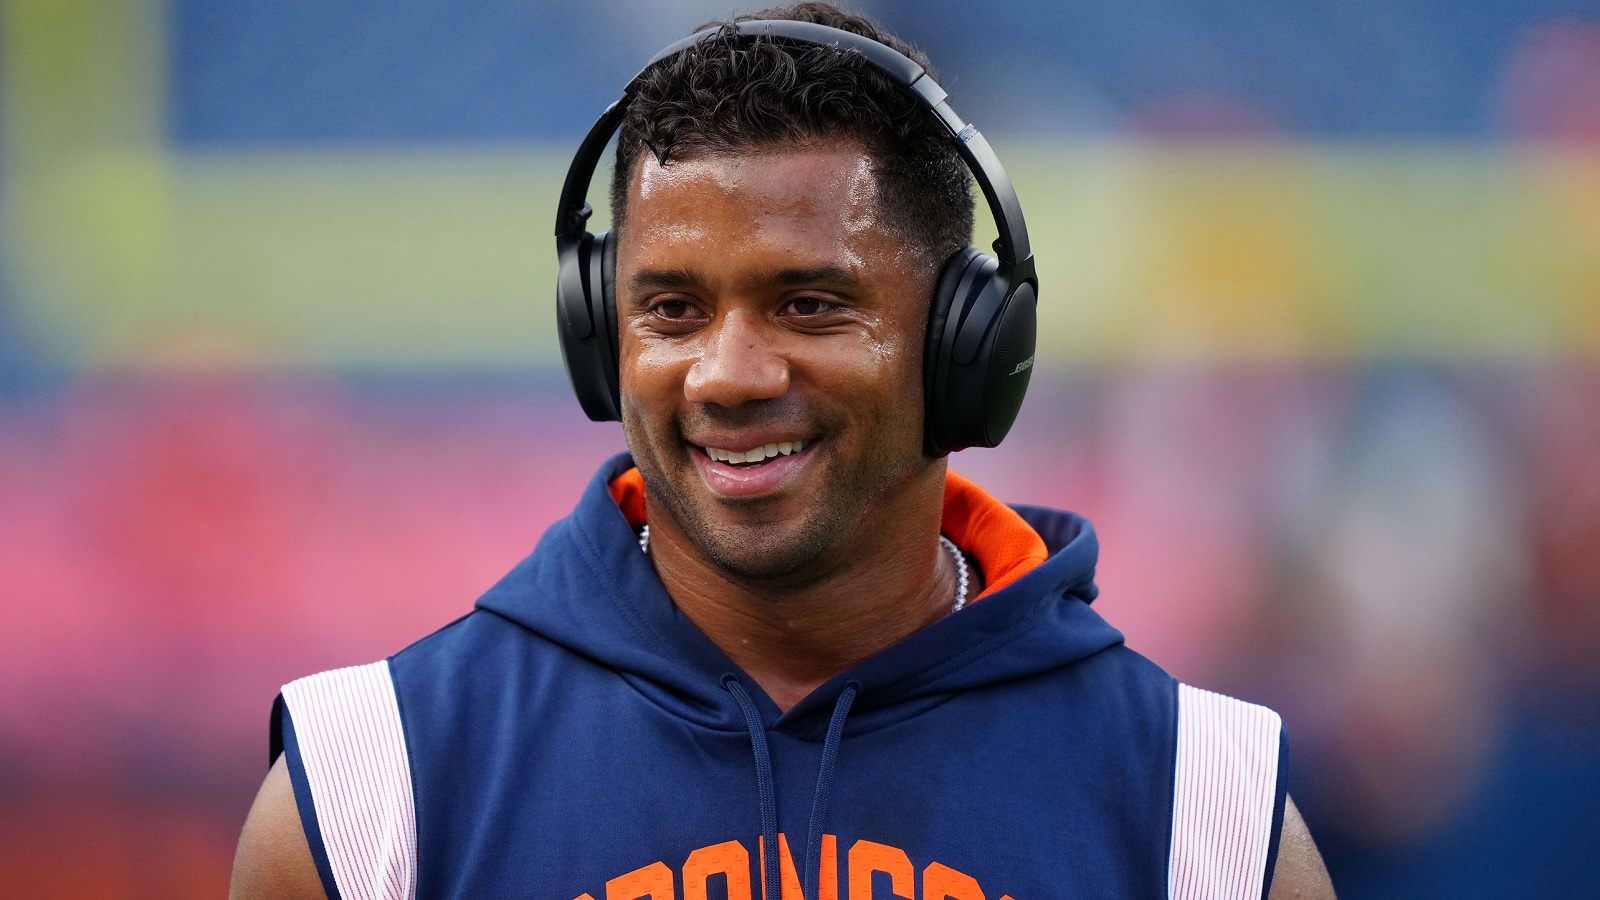 Where did Russell Wilson go to college? Did Russell Wilson play college